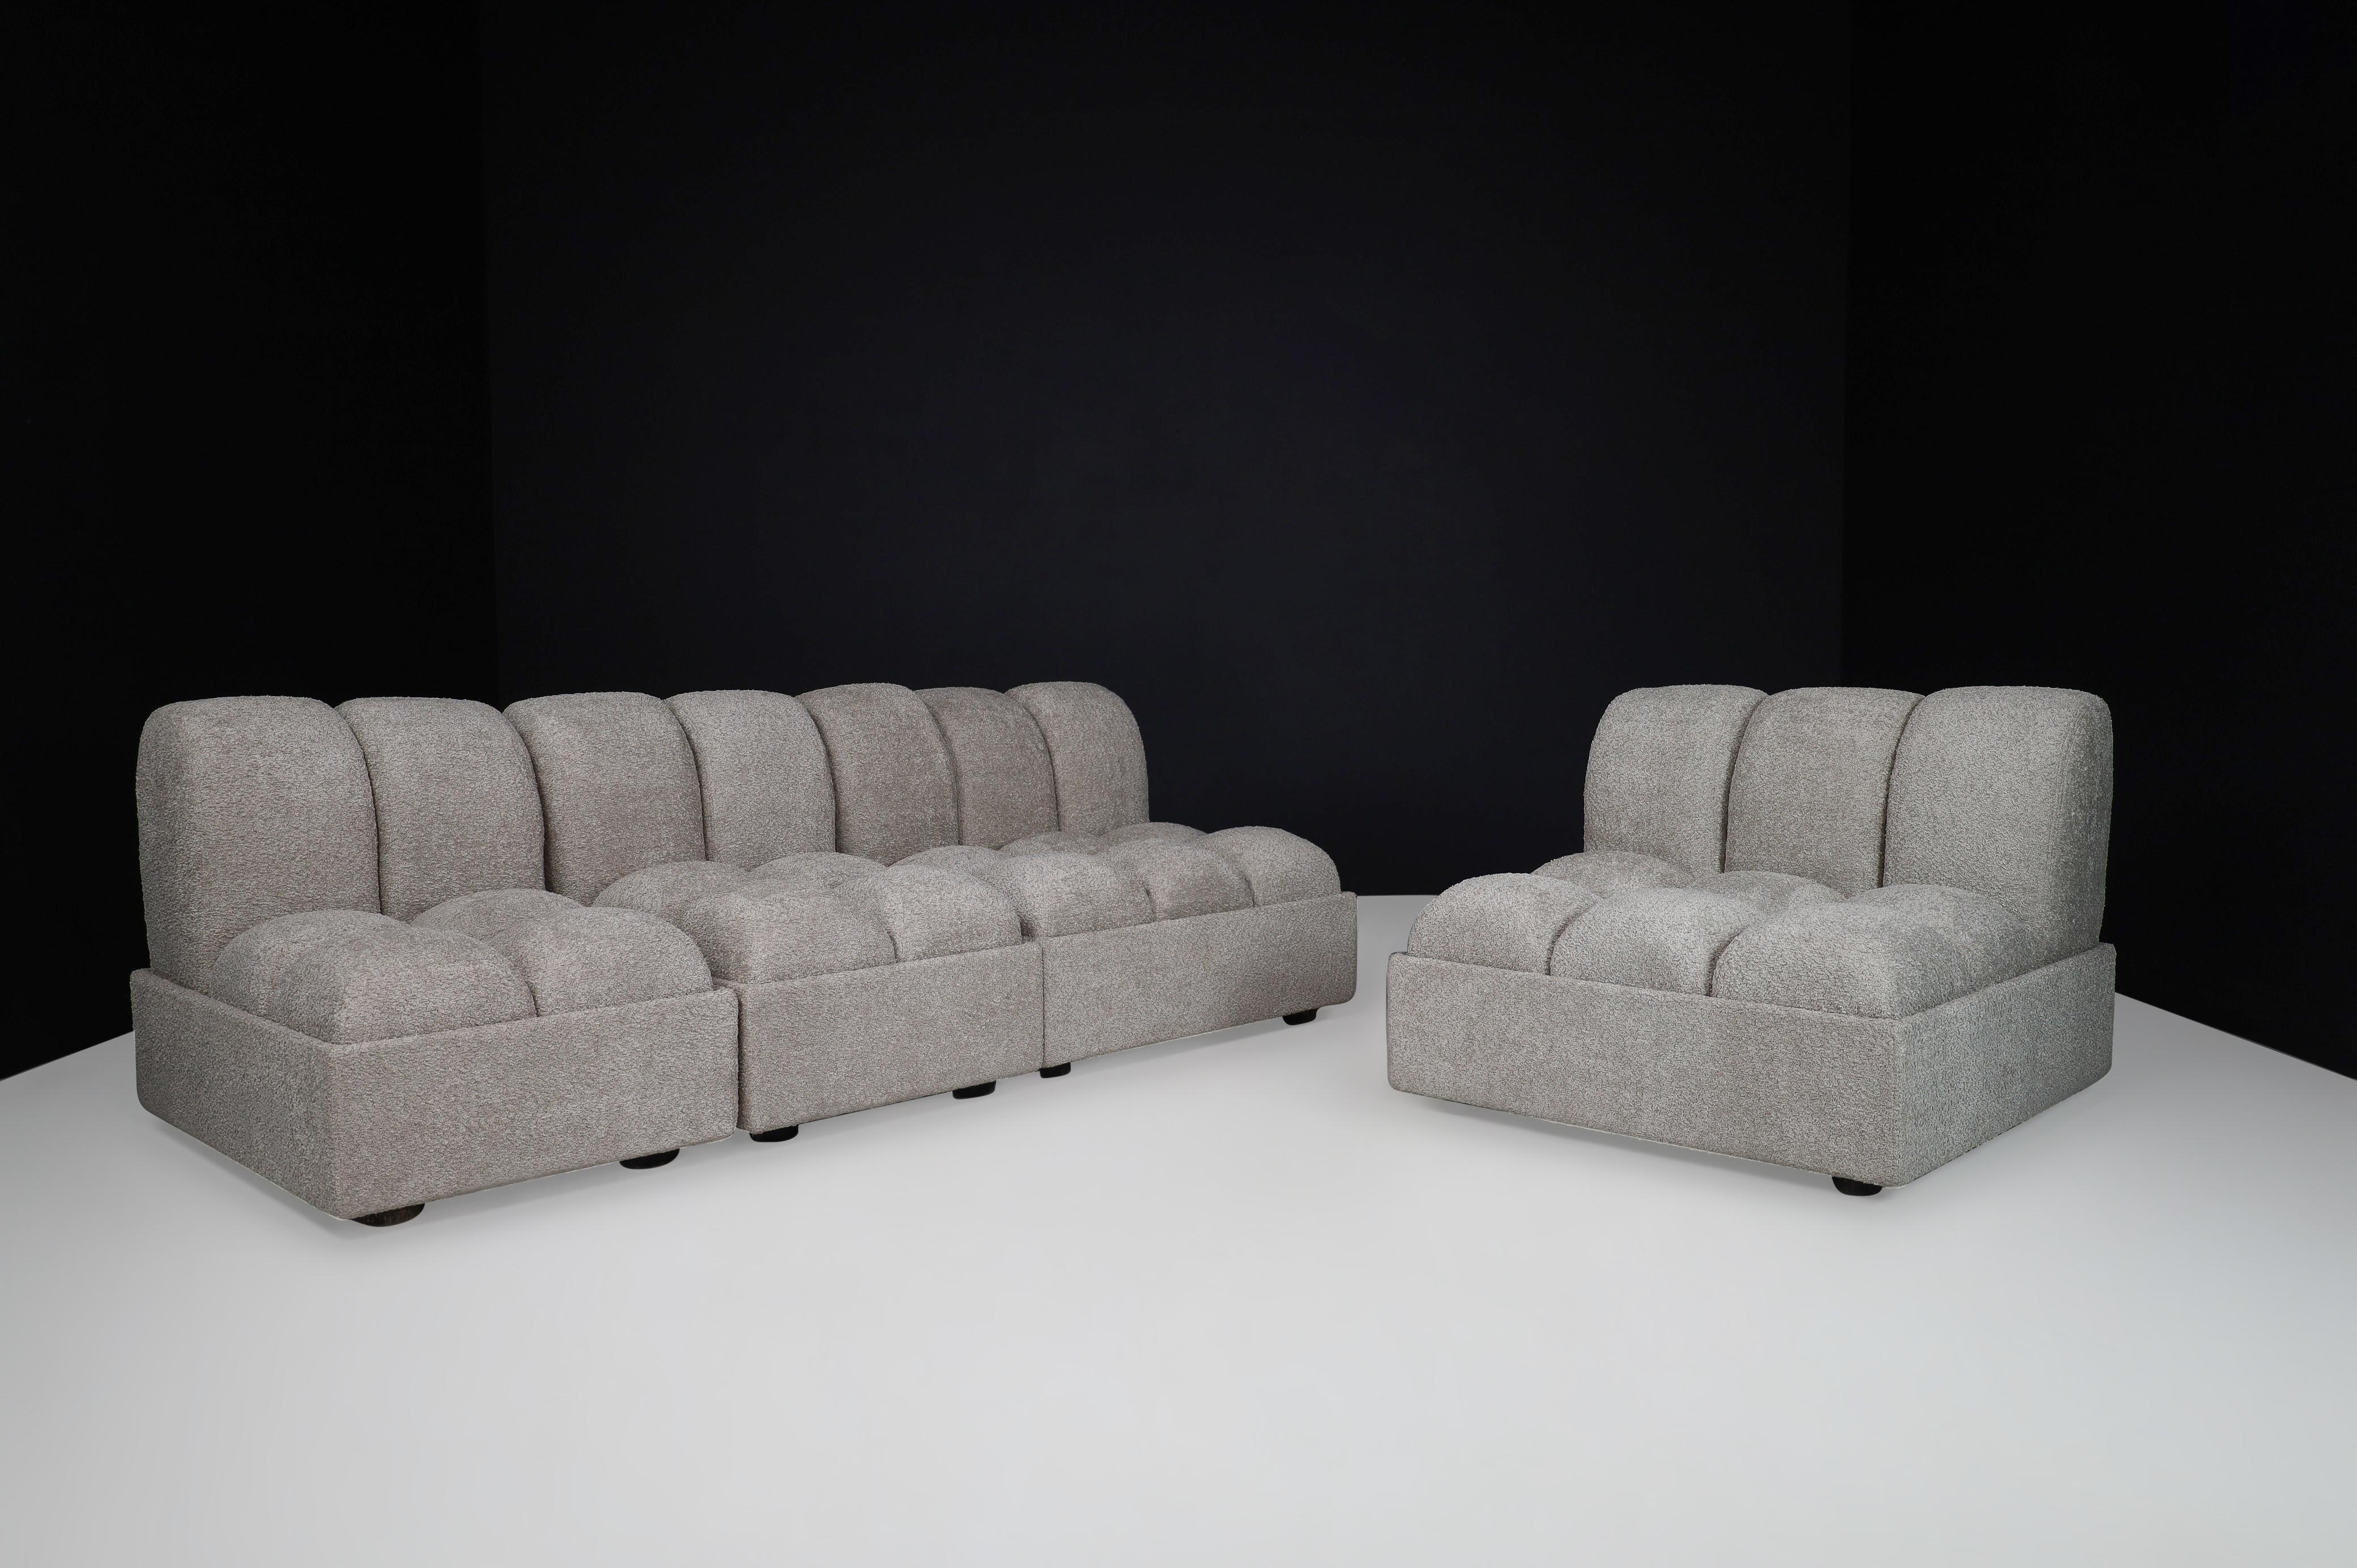 Lounge chairs or sectional sofa in re-upholstered fabric, Italy 1970s

Lounge chairs or sectional sofa were made and designed in Italy circa 1970. This design is characterized by re-upholstered bouclé tufted cushions that give these chairs a